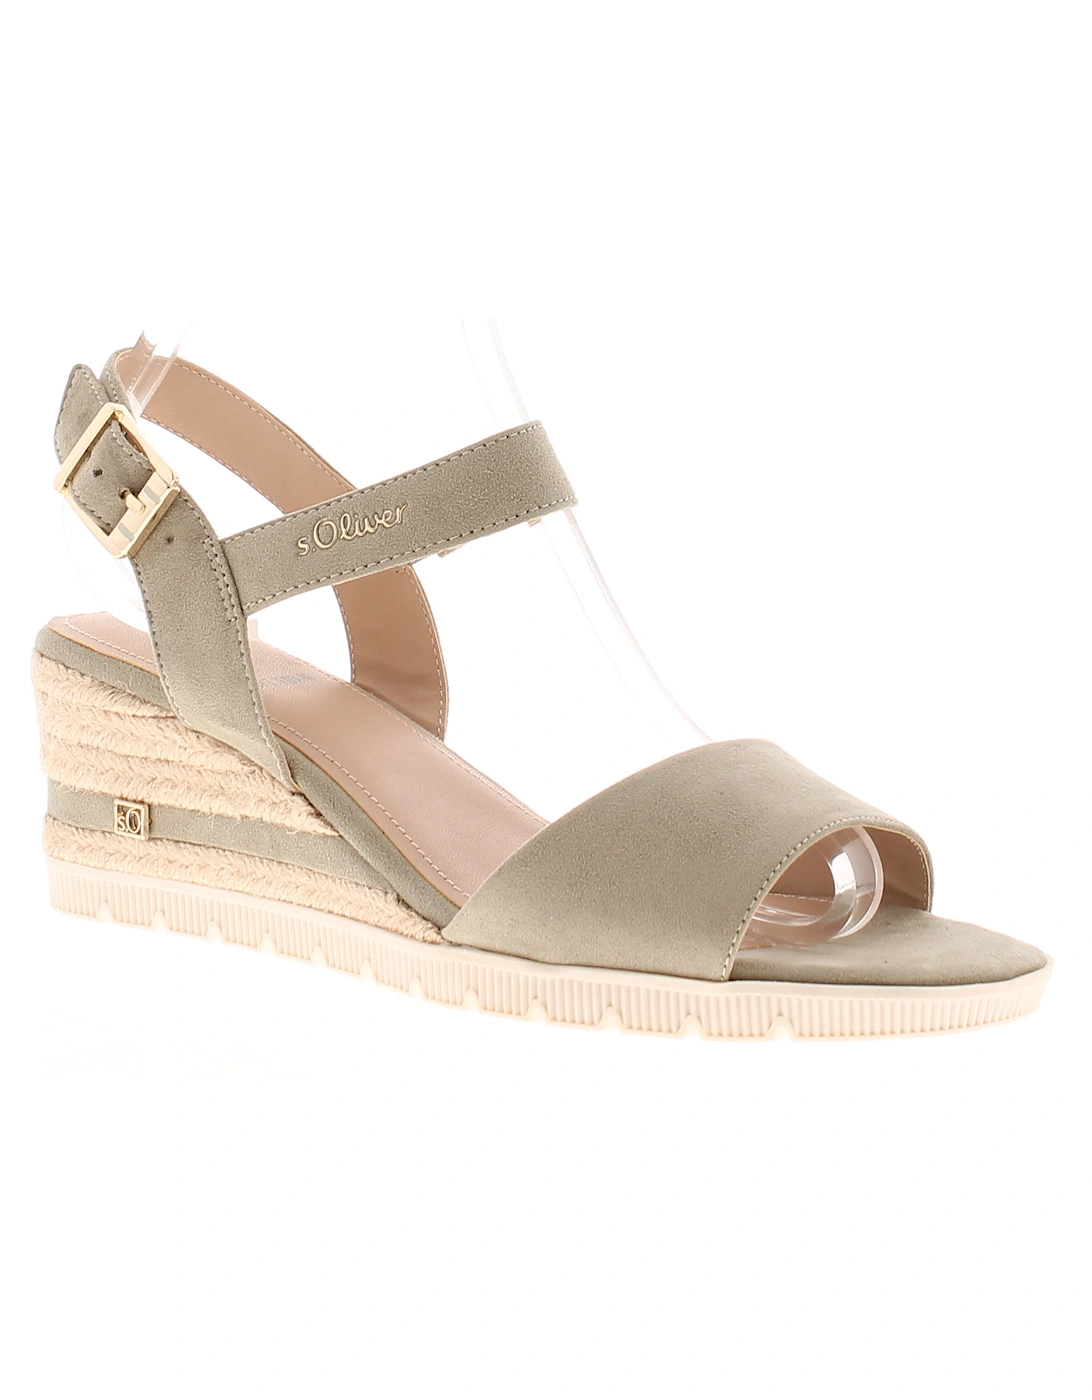 S Oliver Womens Sandals Wedge Sage Buckle pistachio UK Size, 6 of 5